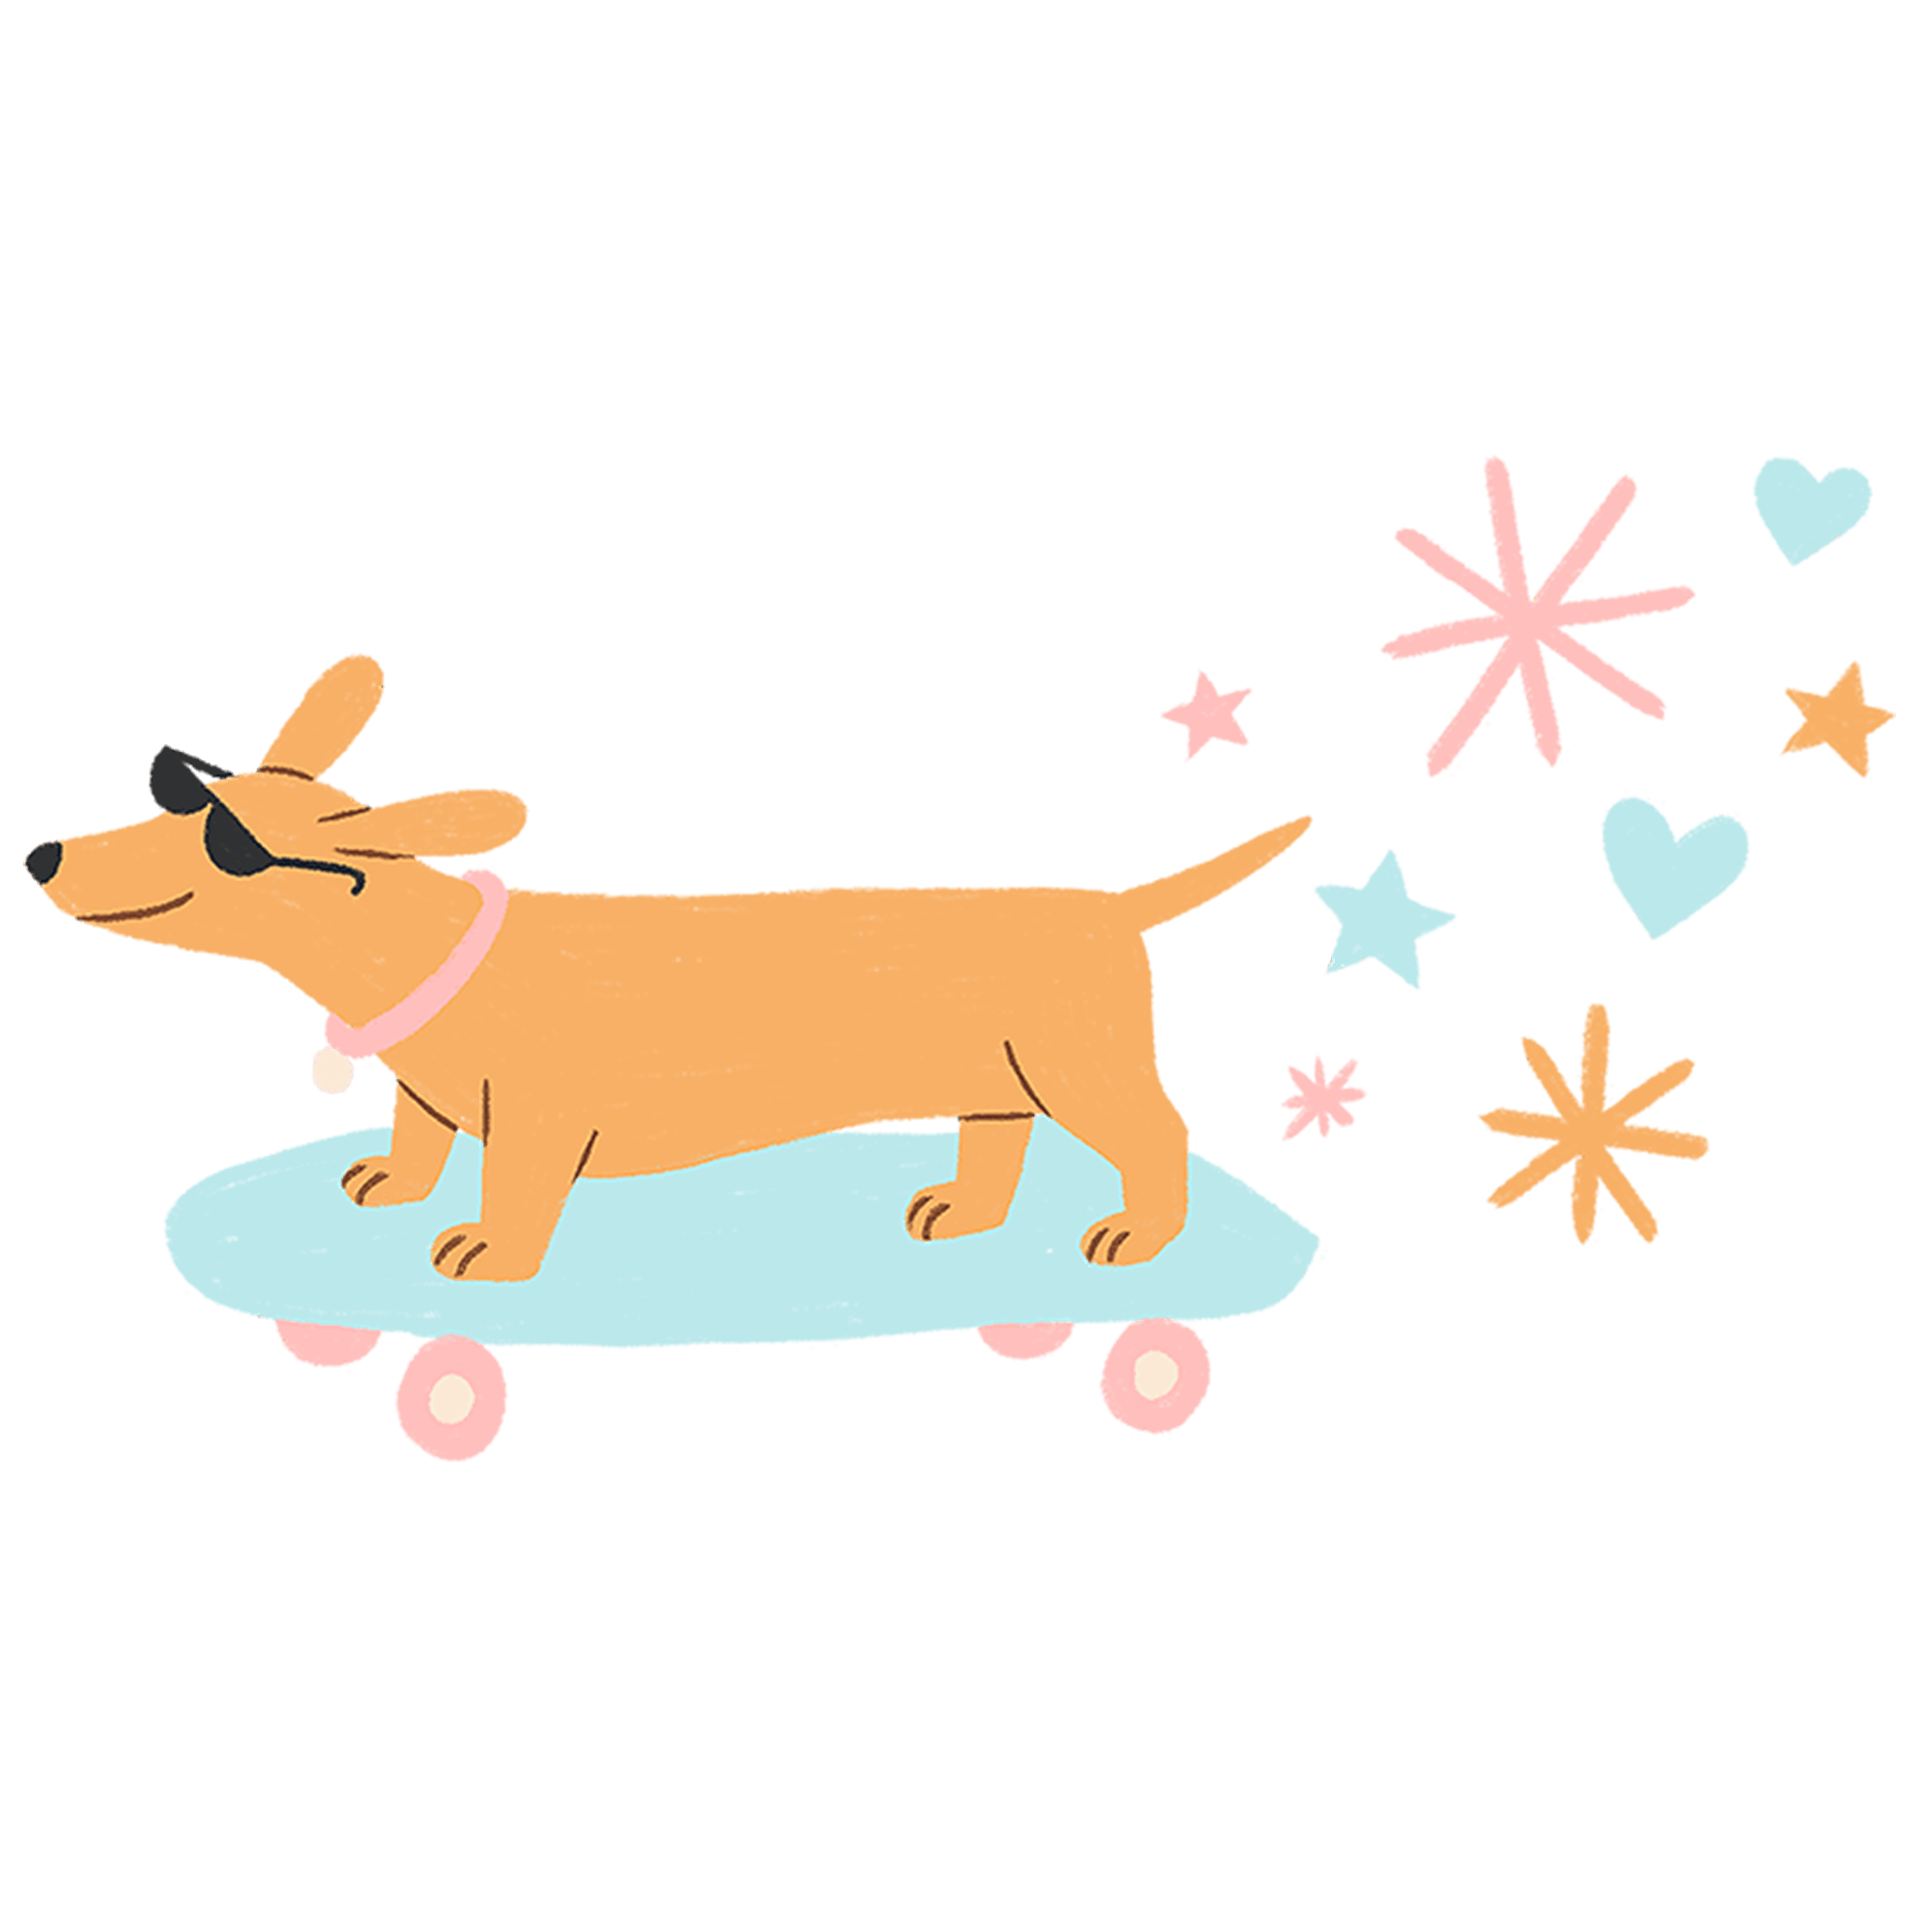 An illustration of an orange dog wearing sunglasses and riding a pink skateboard. There are colourful stars and hearts streaming out behind it.